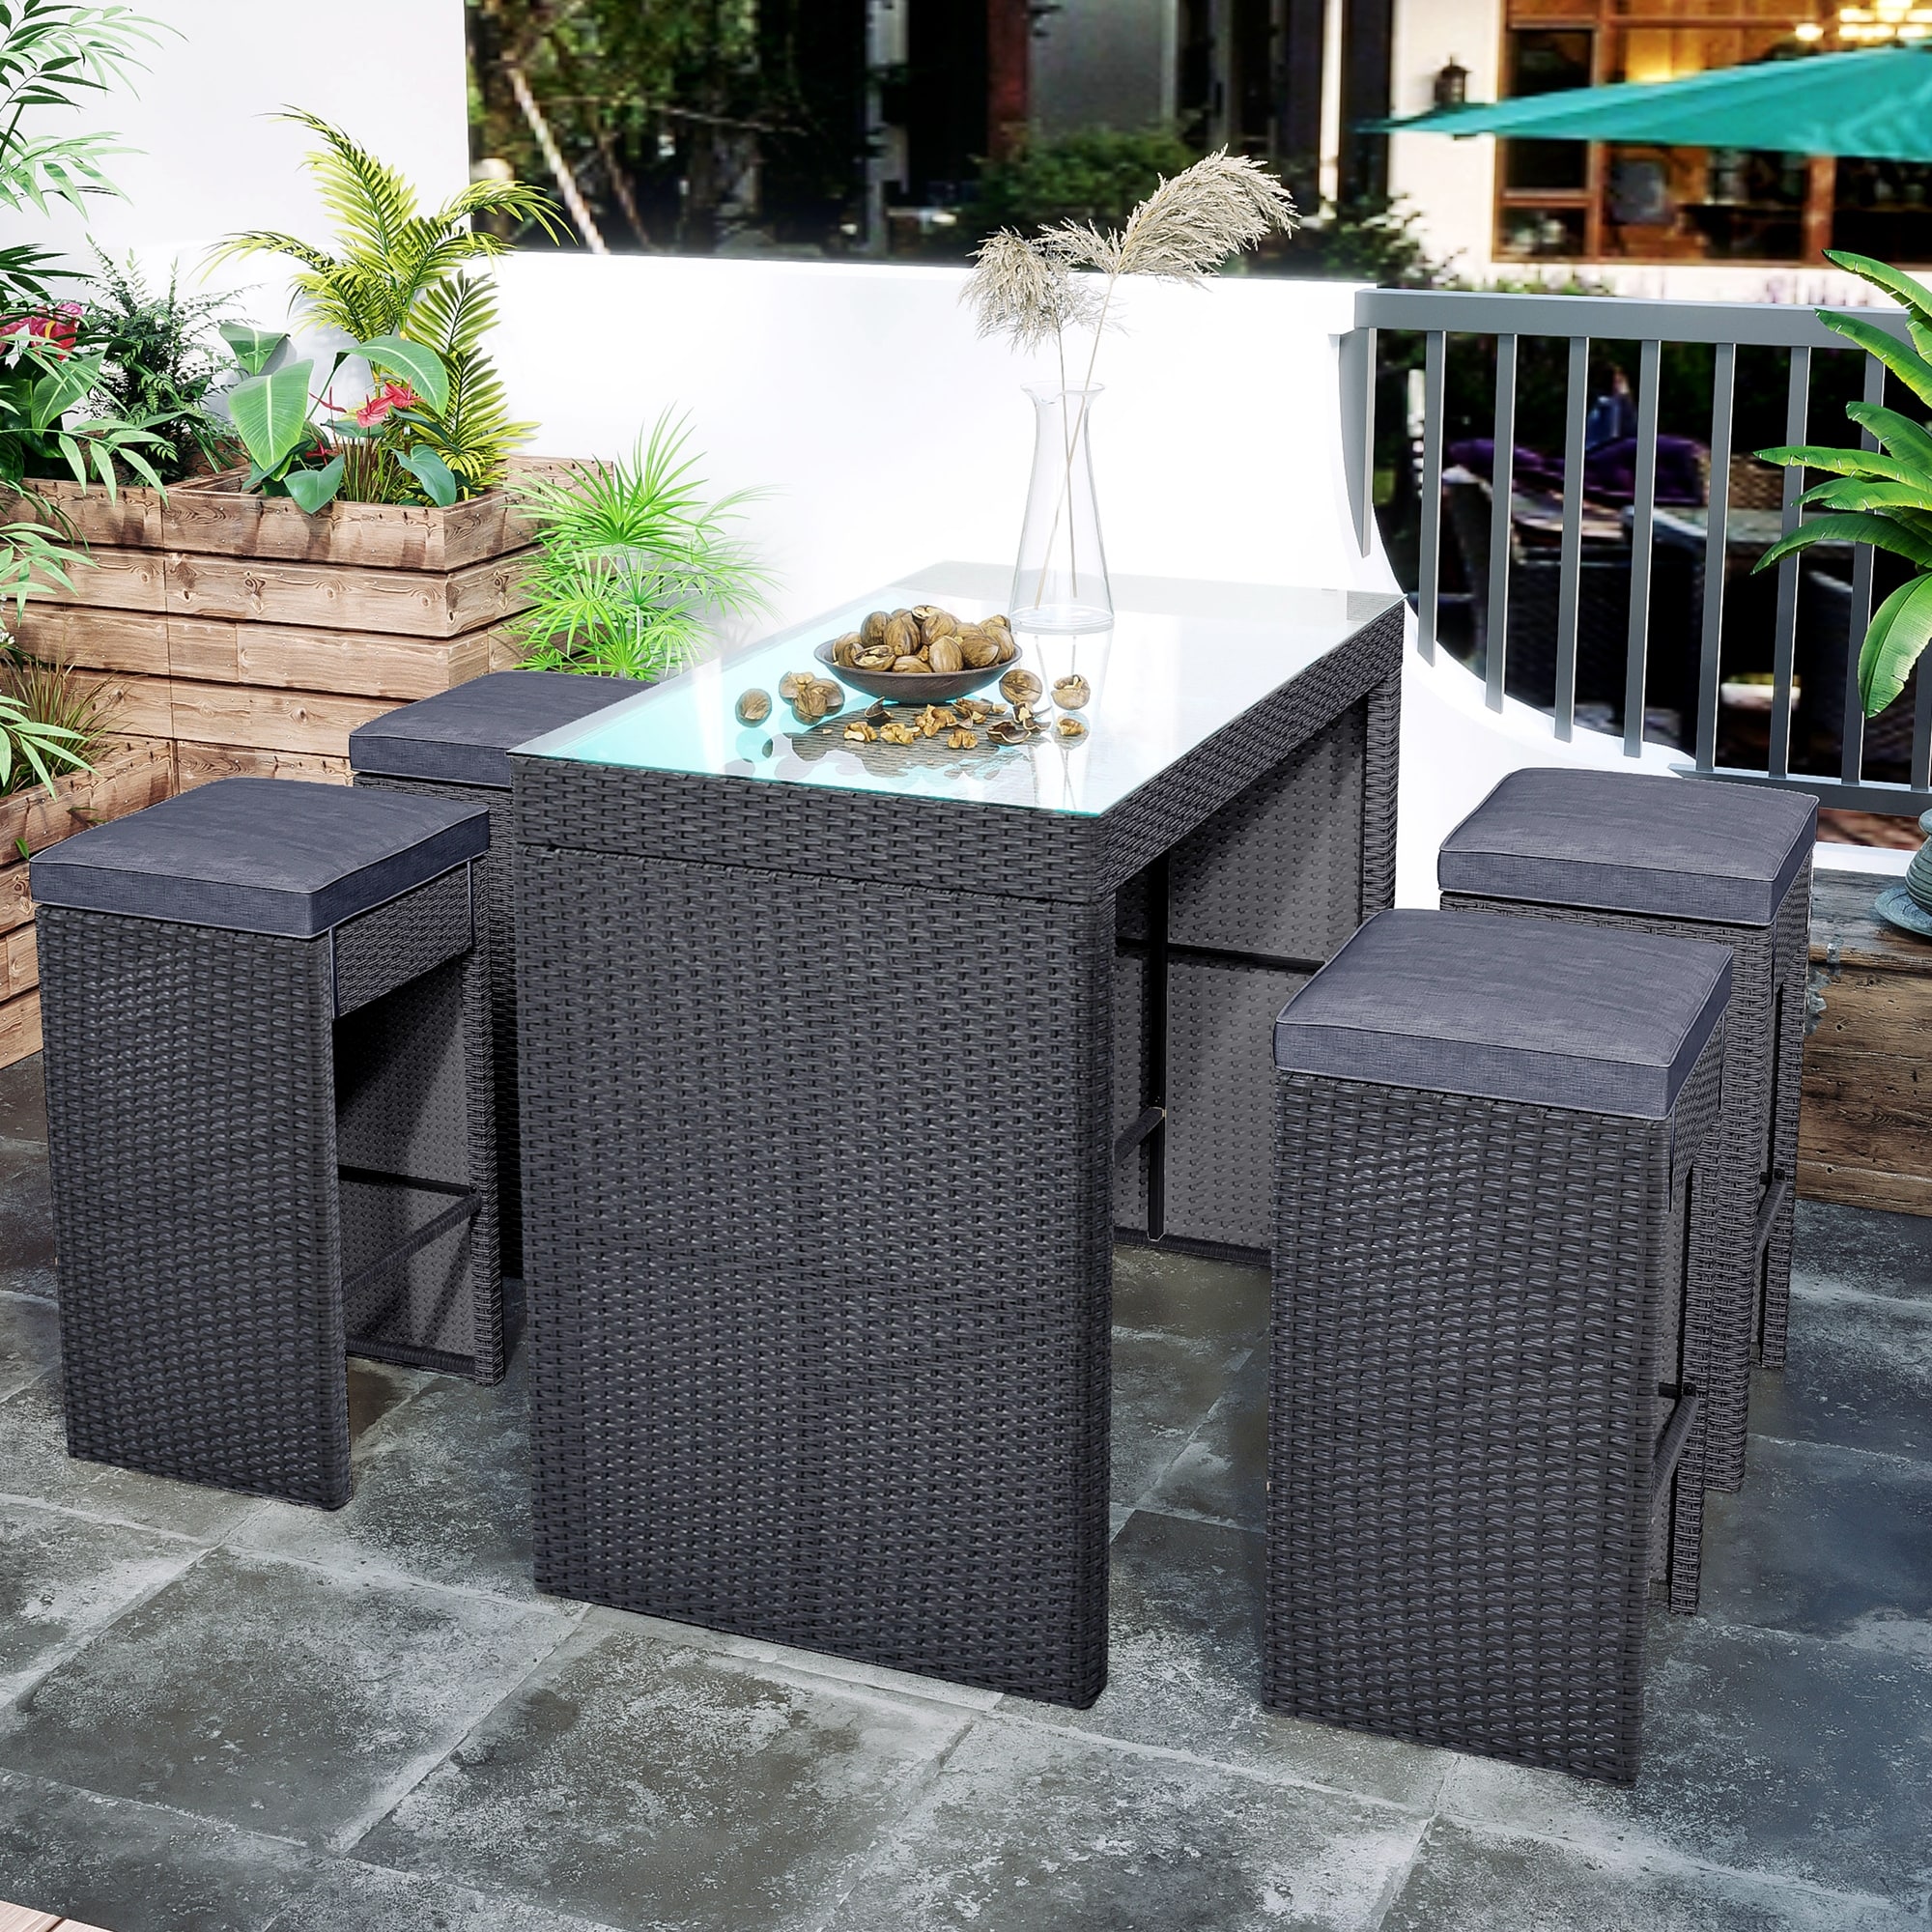 5-piece Rattan Outdoor Patio Furniture Bar Dining Table Set With 4 Stools And Cushion